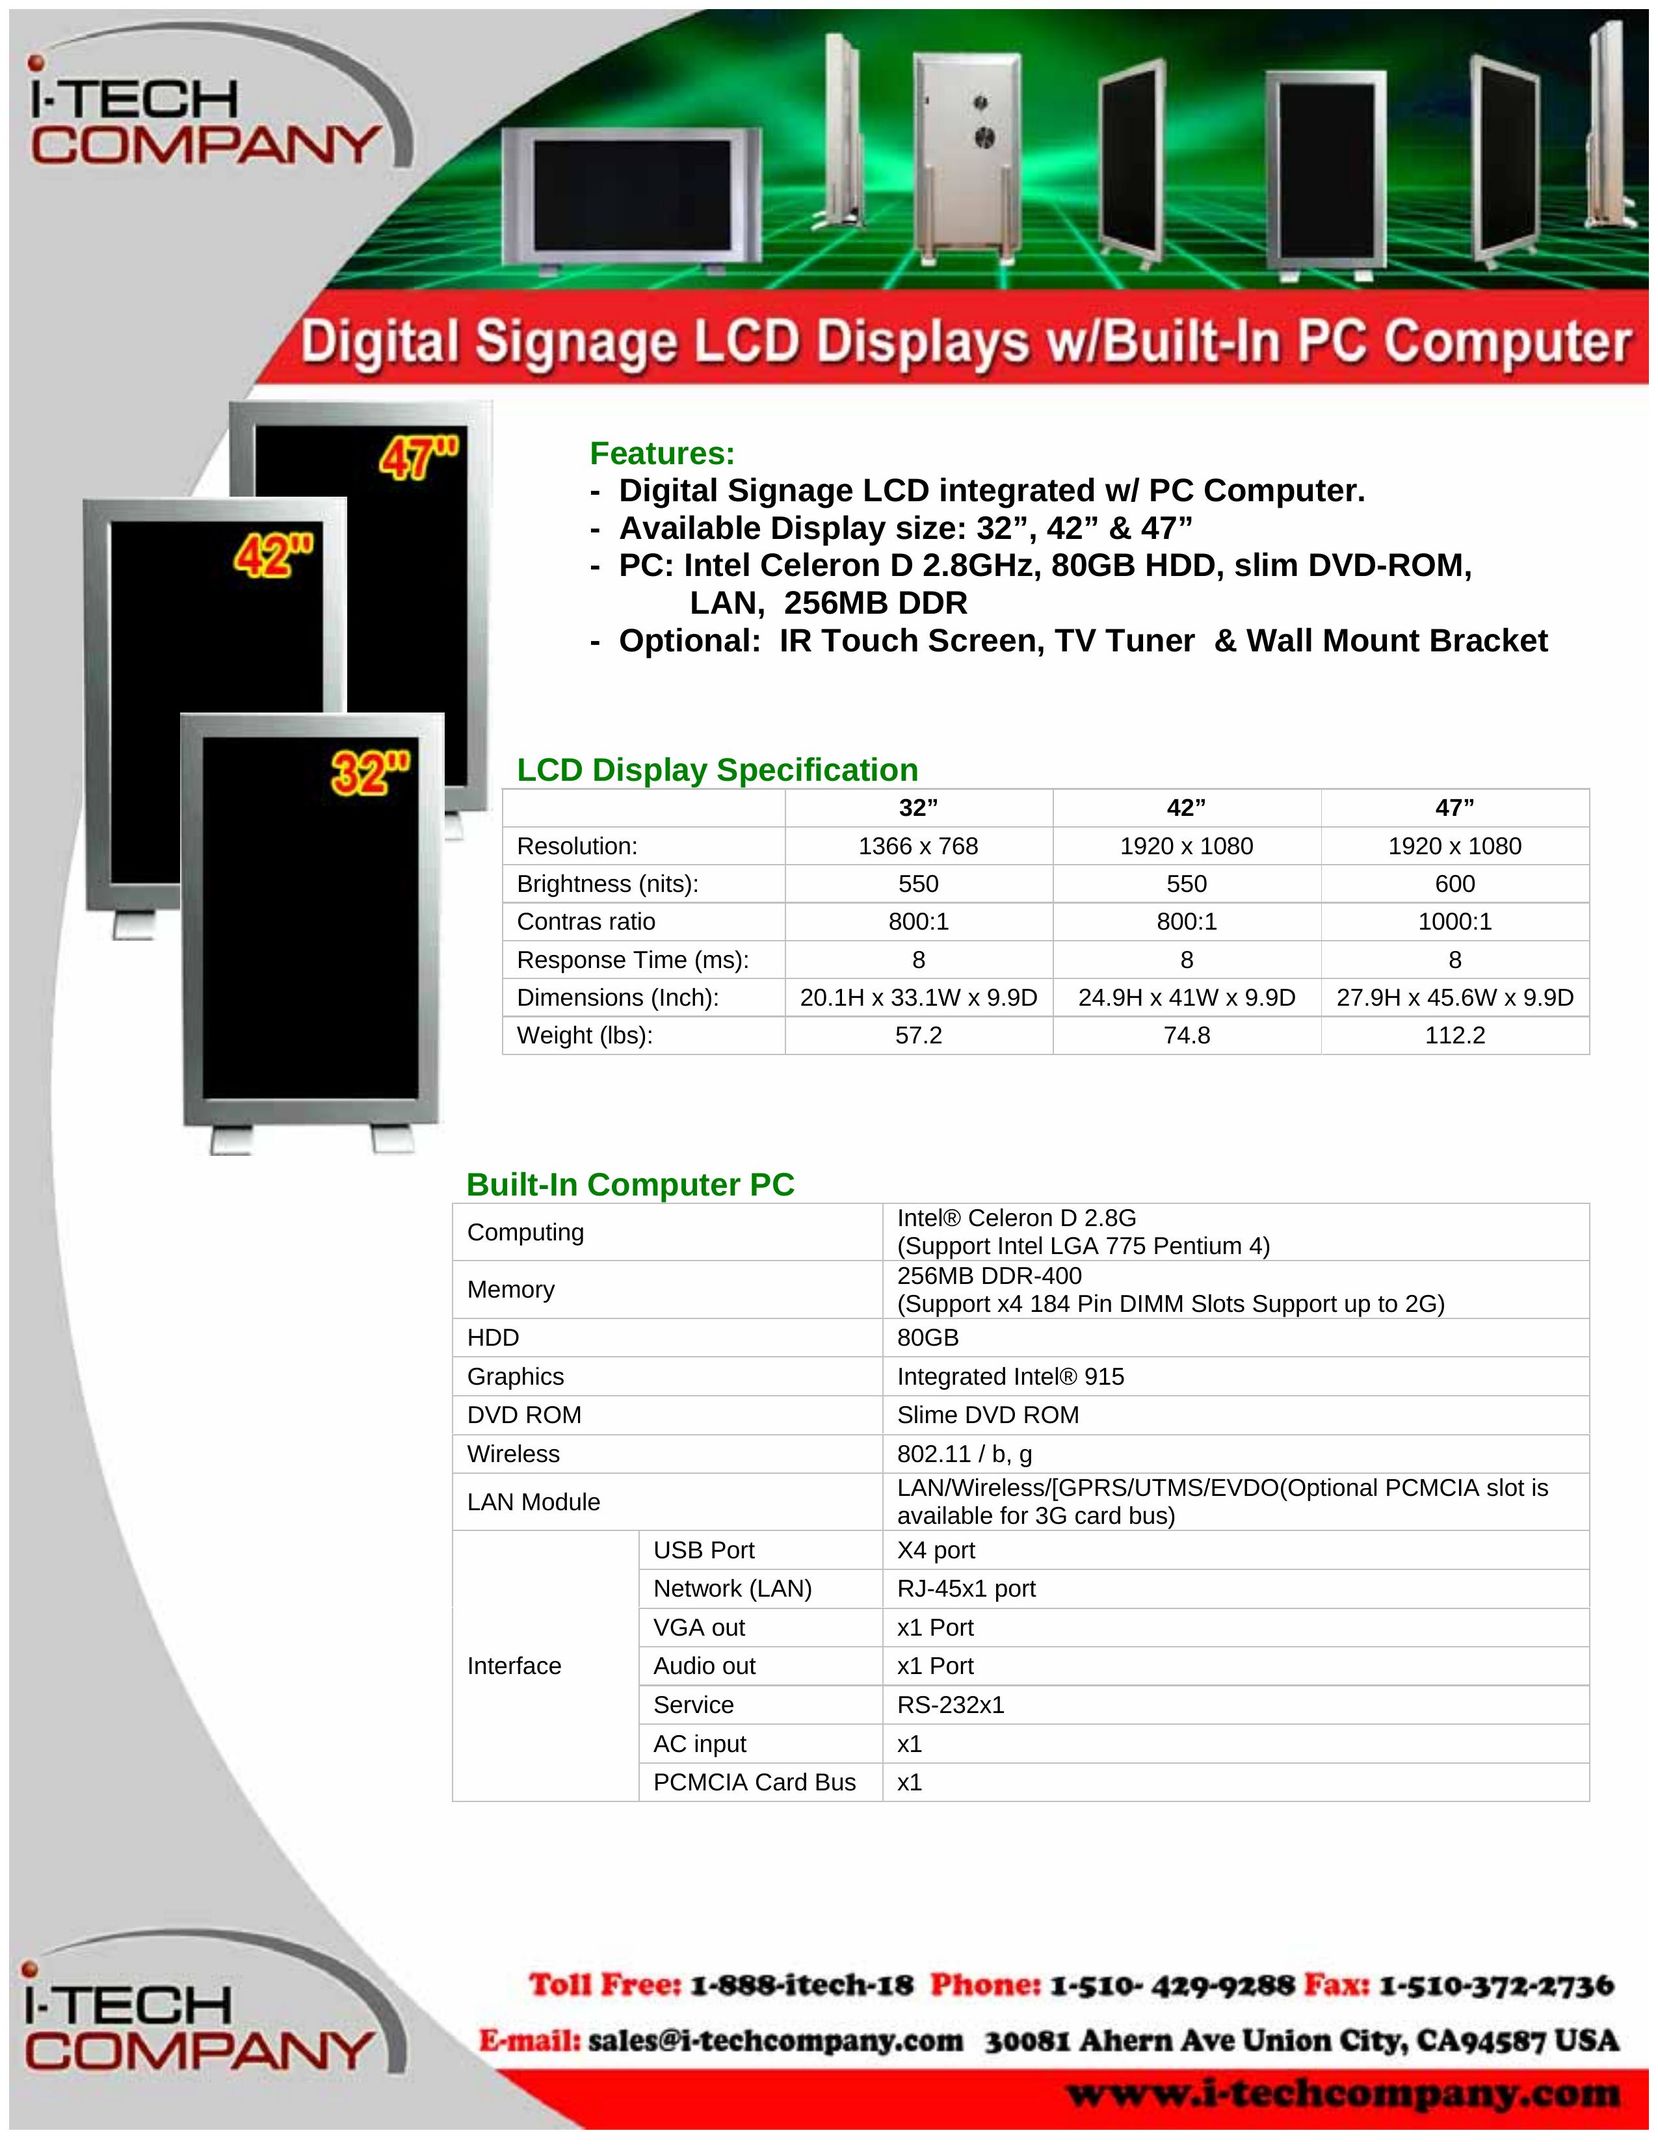 I-Tech Company Digital Signage LCD integrated w/ PC Computer Computer Monitor User Manual